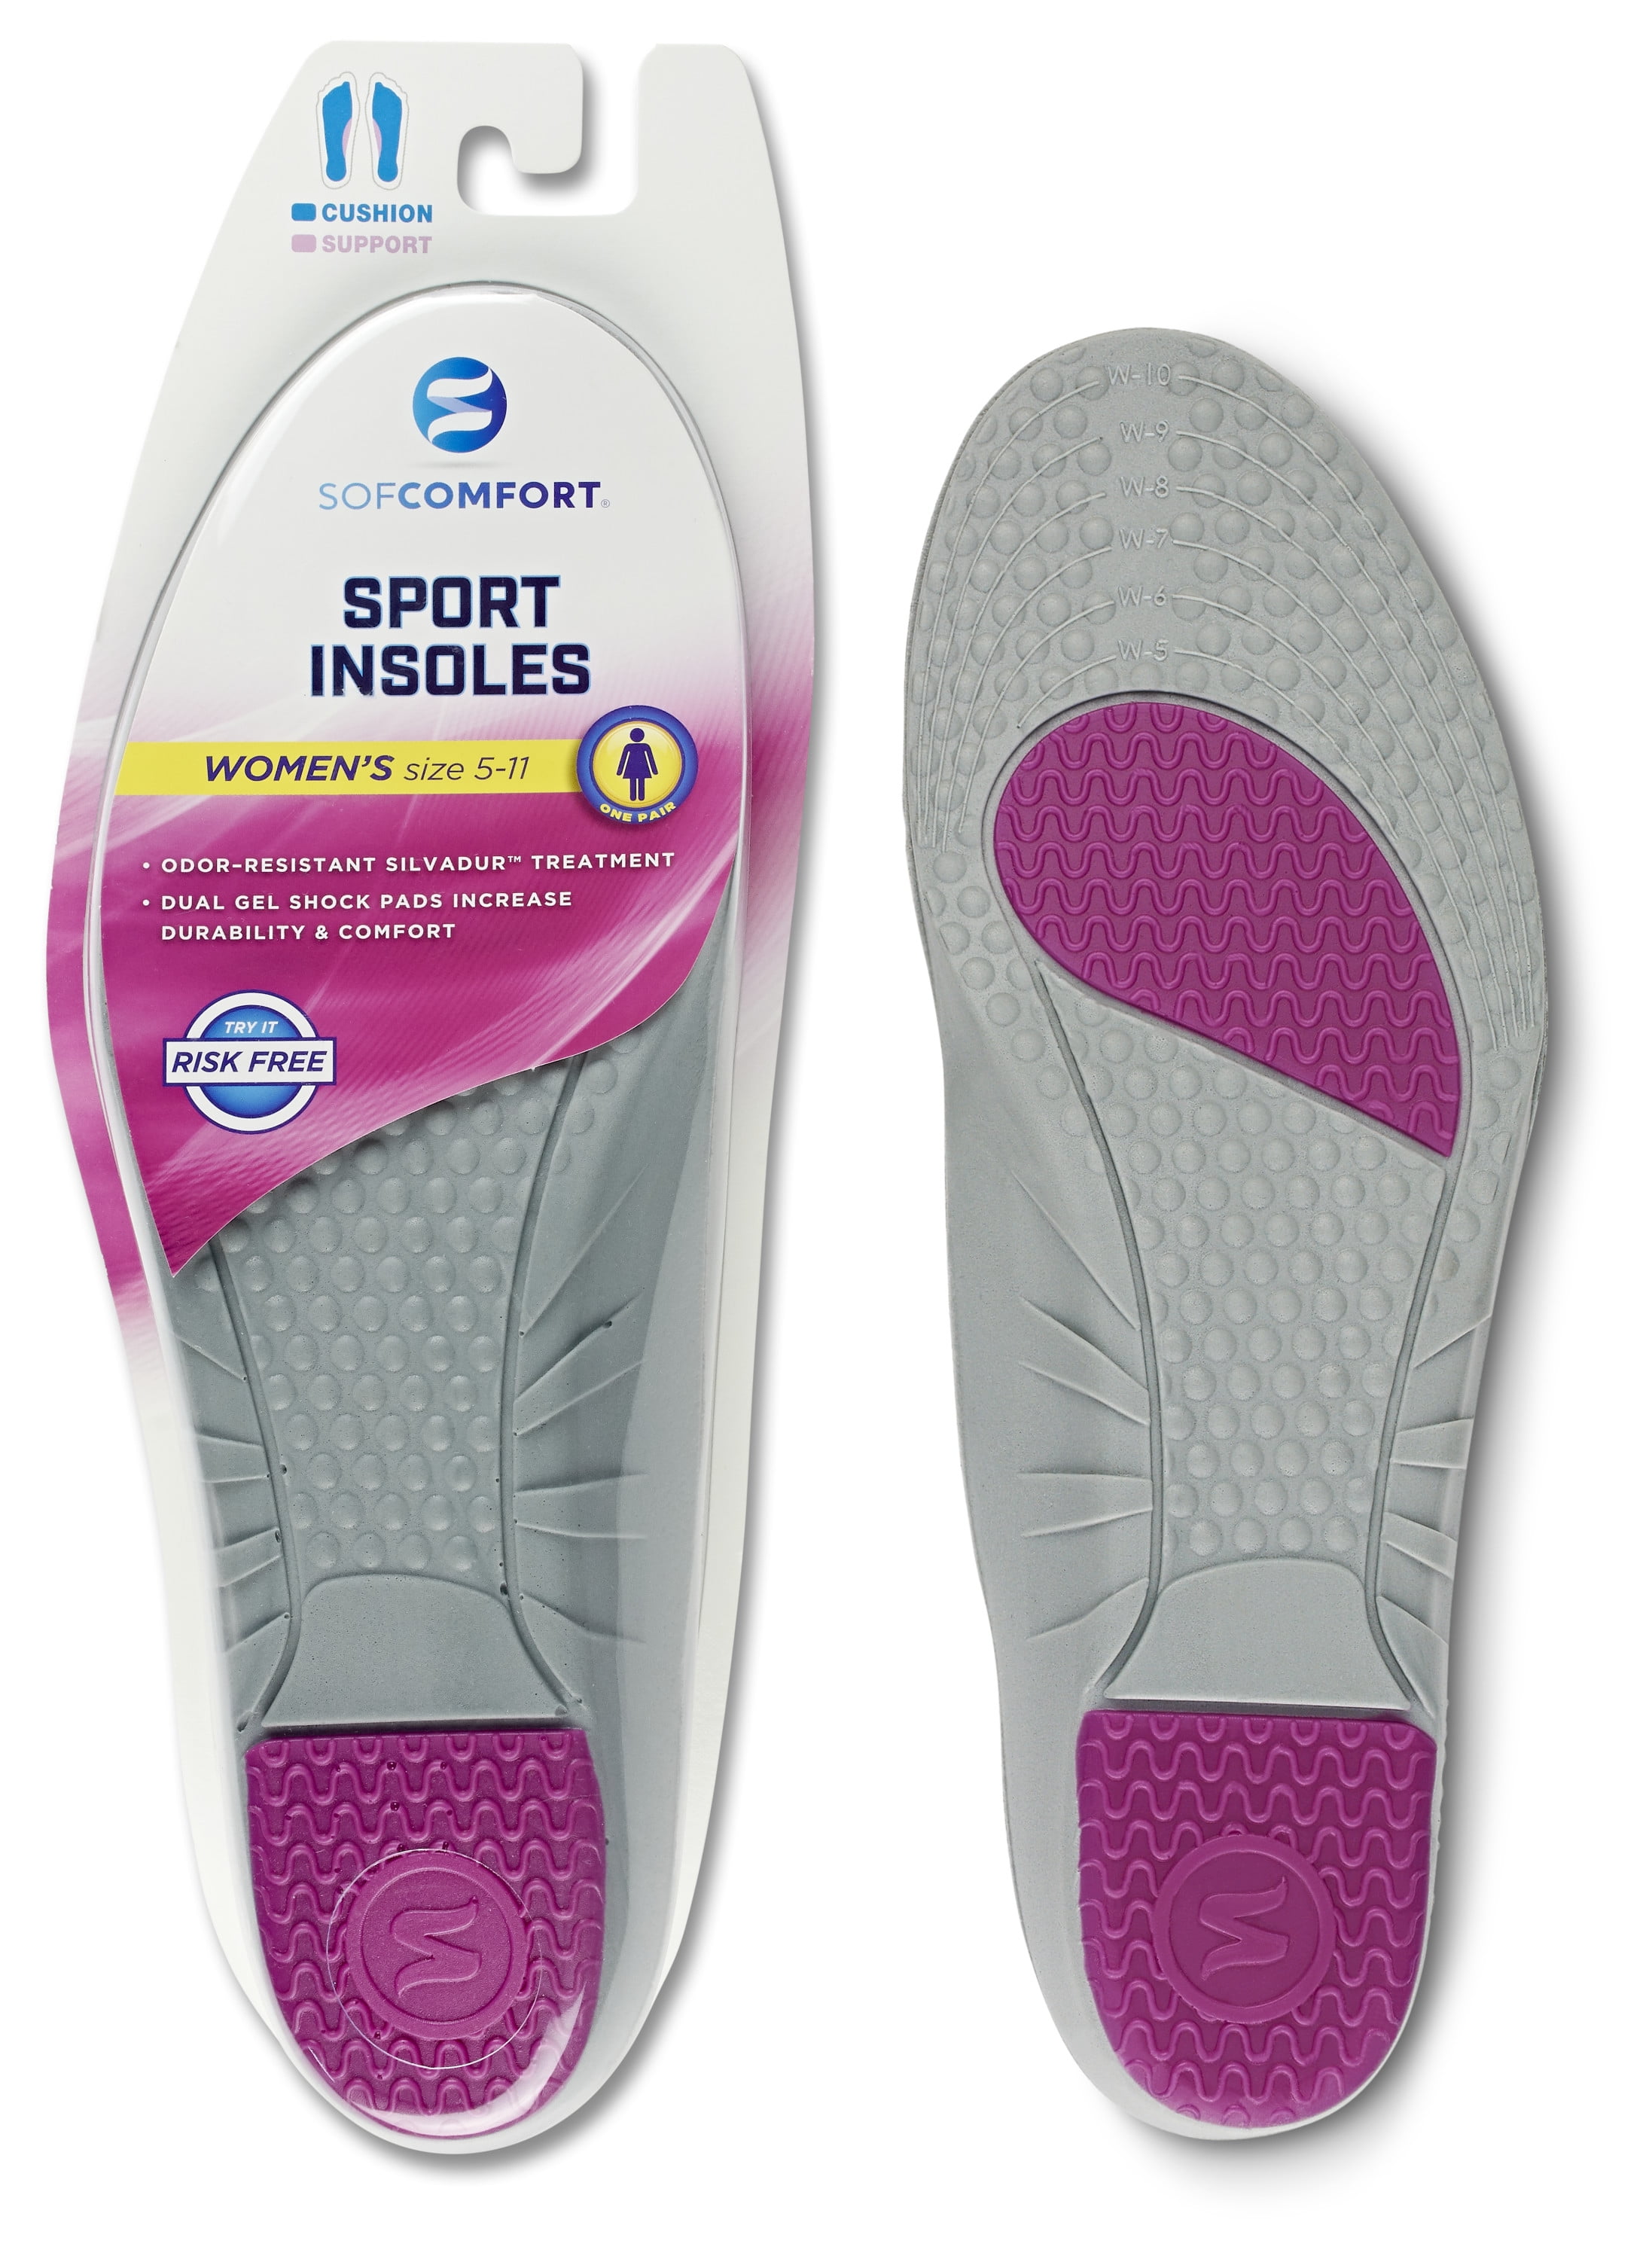 Premier Comfort Plus Cushion Insoles for Women 1 pair Pack of 10 size: 7-8 